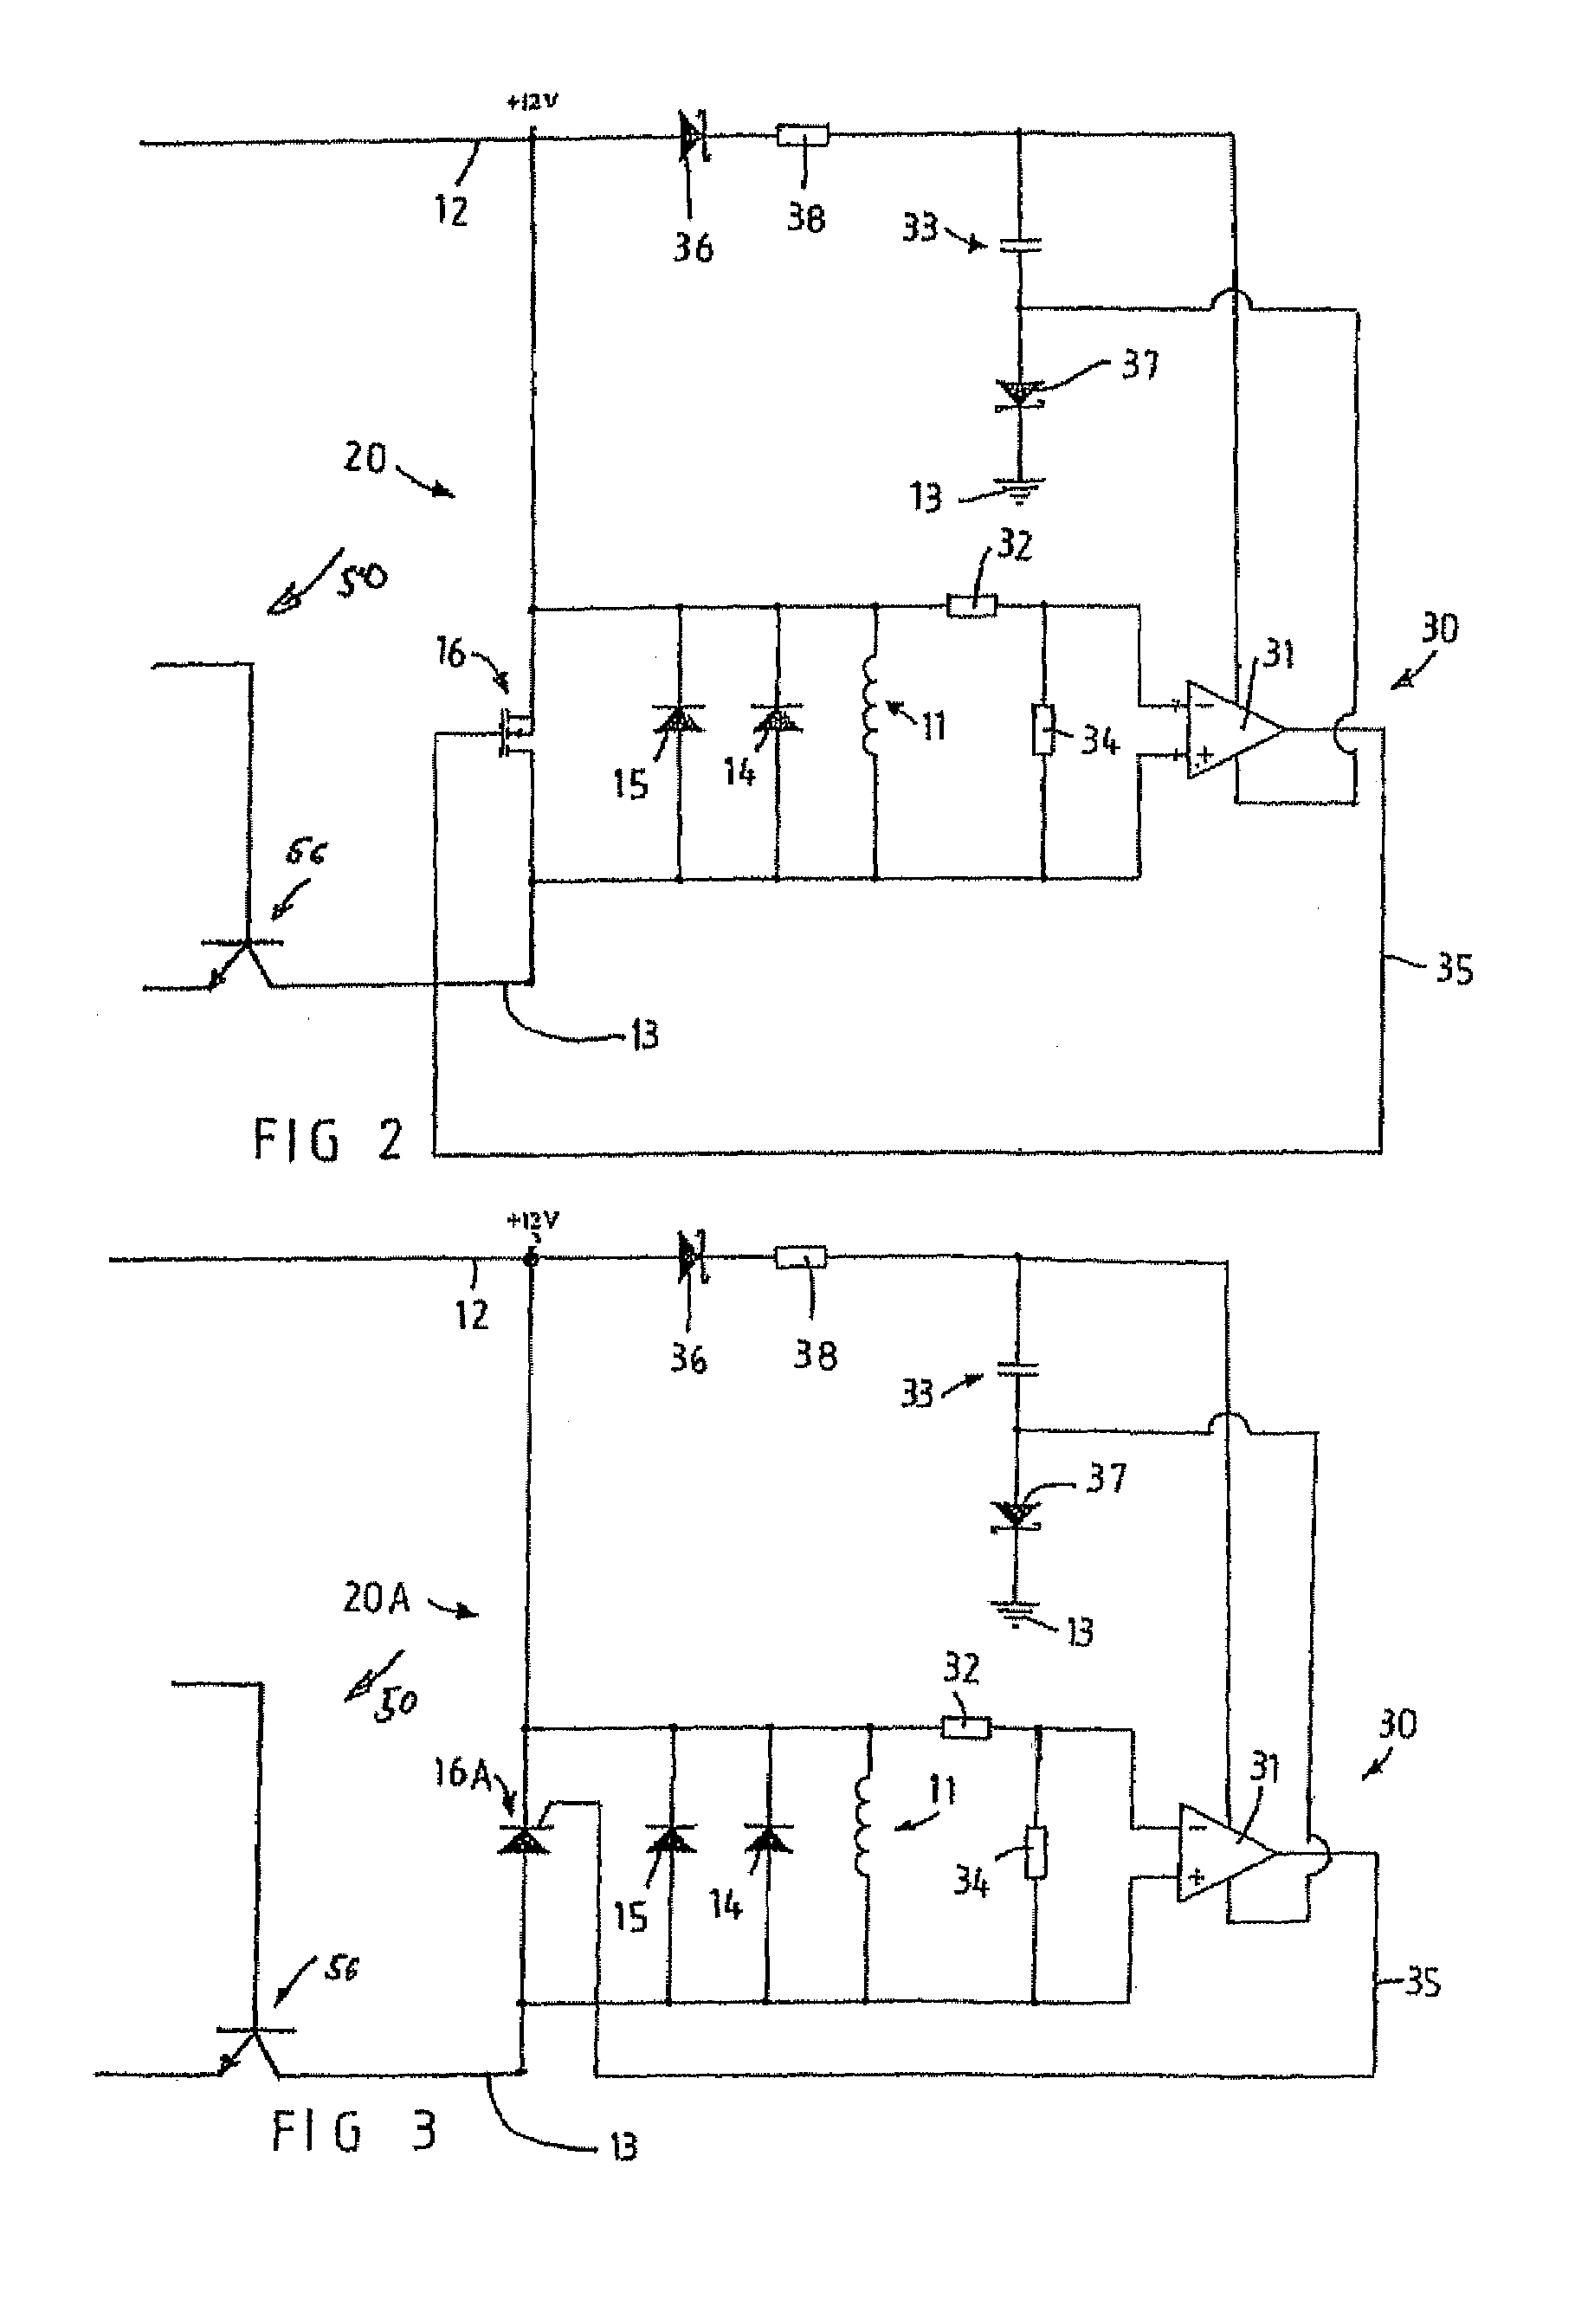 Protection circuit for intrinsically safe electro-magnetic actuators and a protection circuit for intrinsically safe energy supply systems